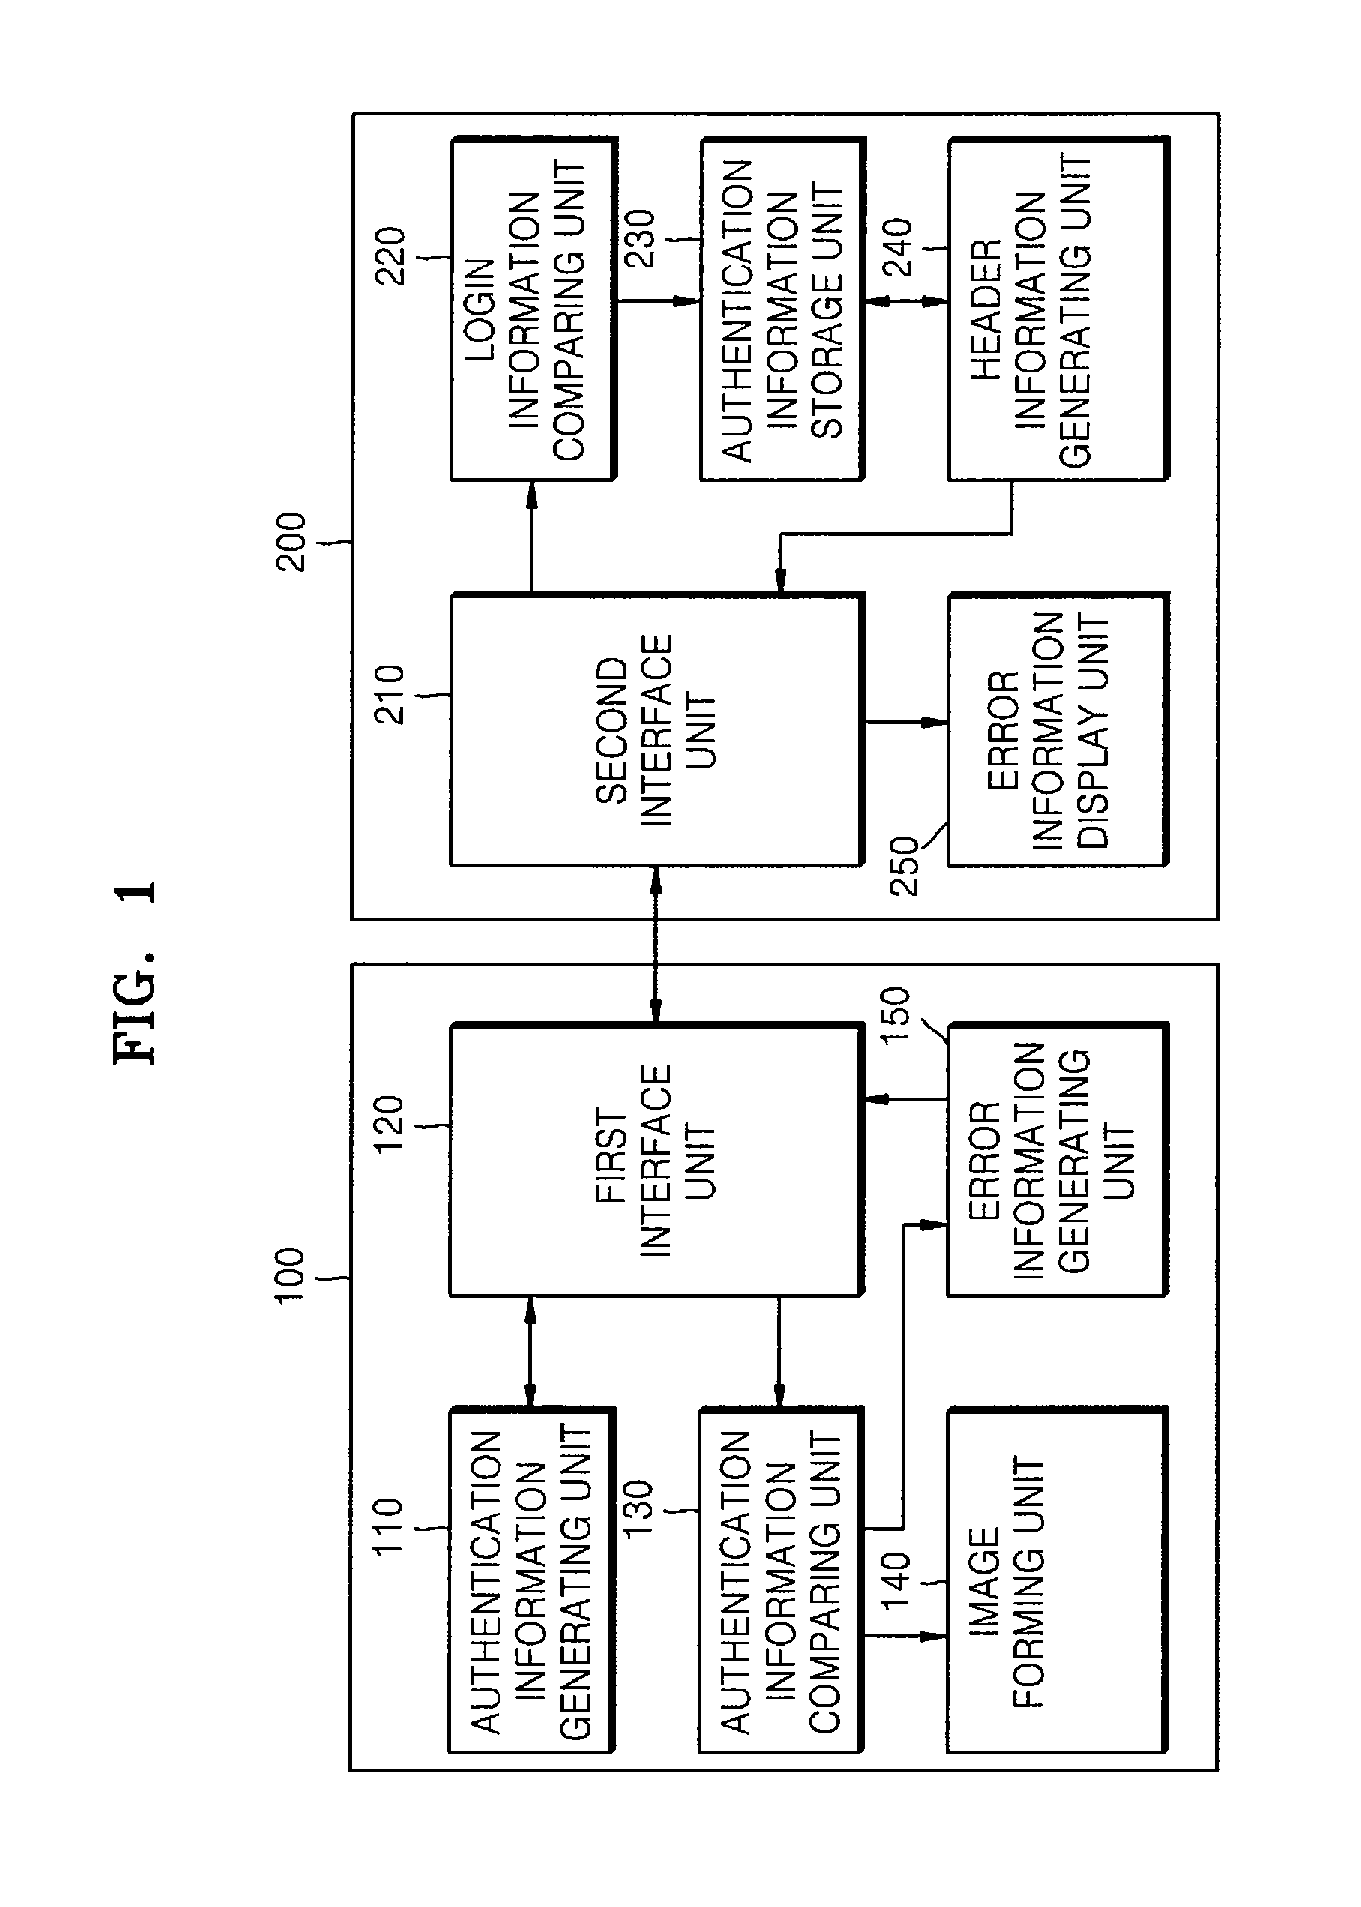 Image forming system and method using authentication information, image forming apparatus, authentication information providing device and method of using image forming apparatus